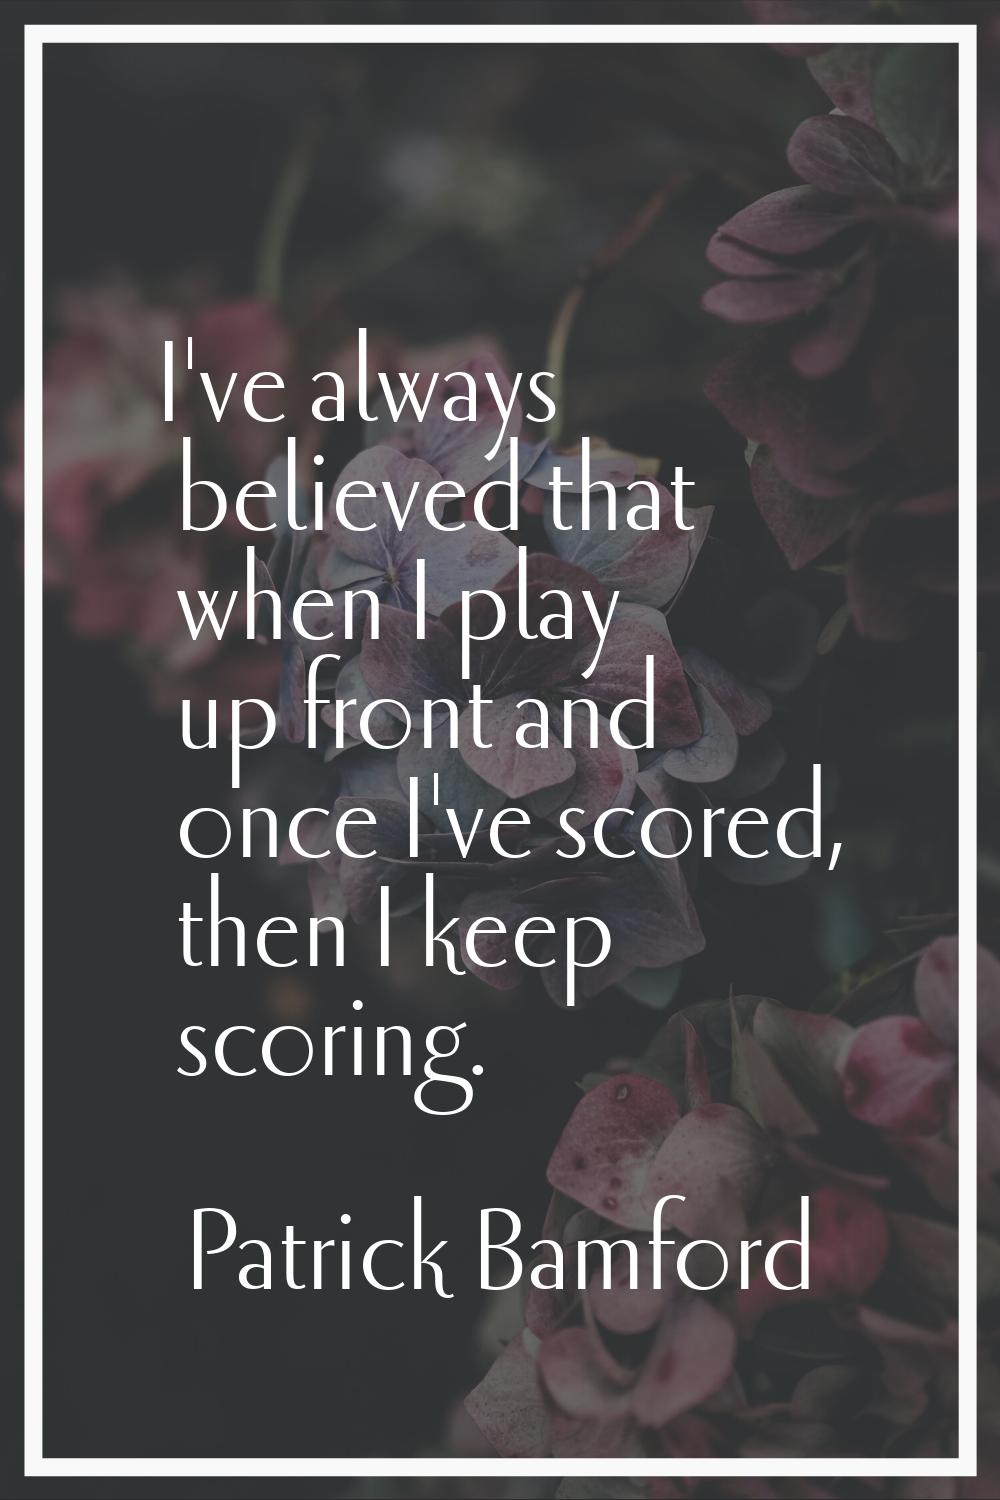 I've always believed that when I play up front and once I've scored, then I keep scoring.